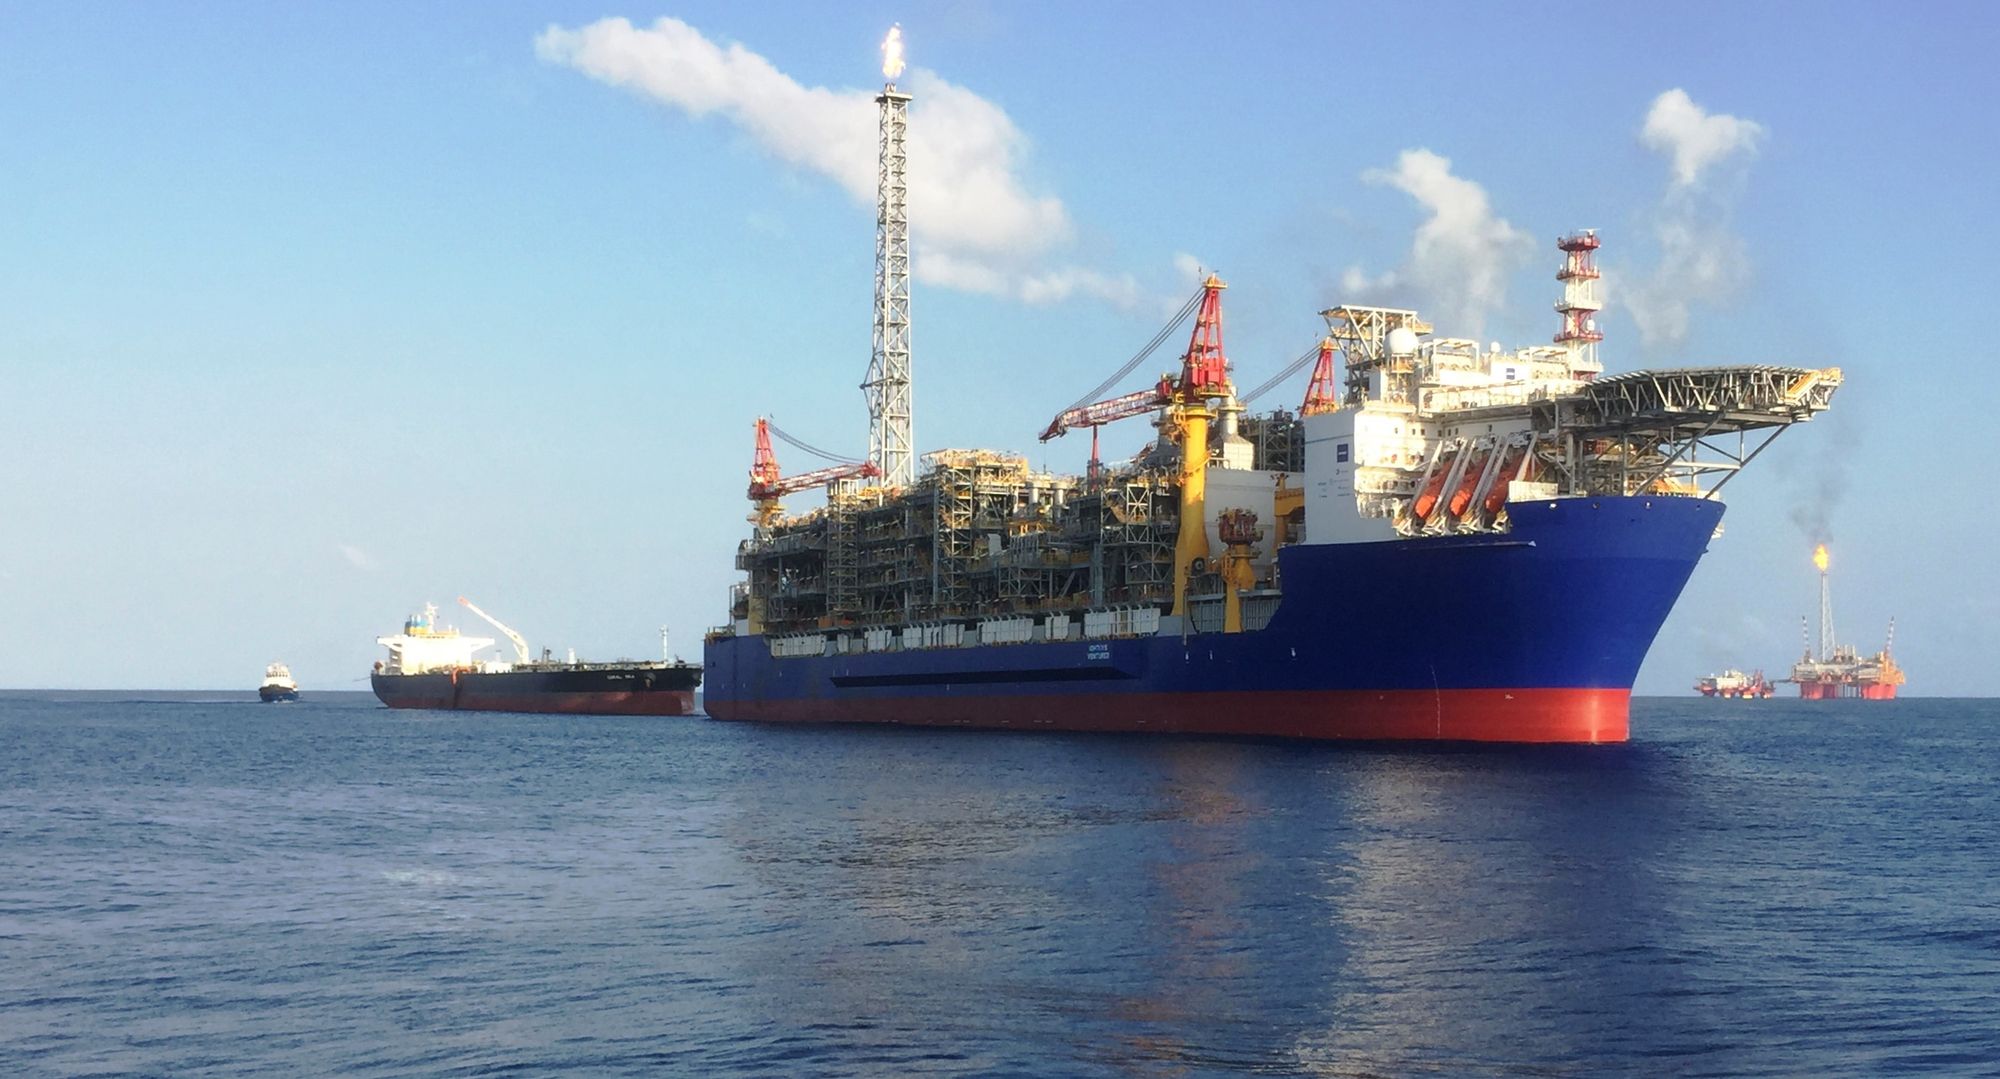 Inpex's Ichthys Venturer FPSO loading condensate with the Ichthys Explorer central processing platform in the background.